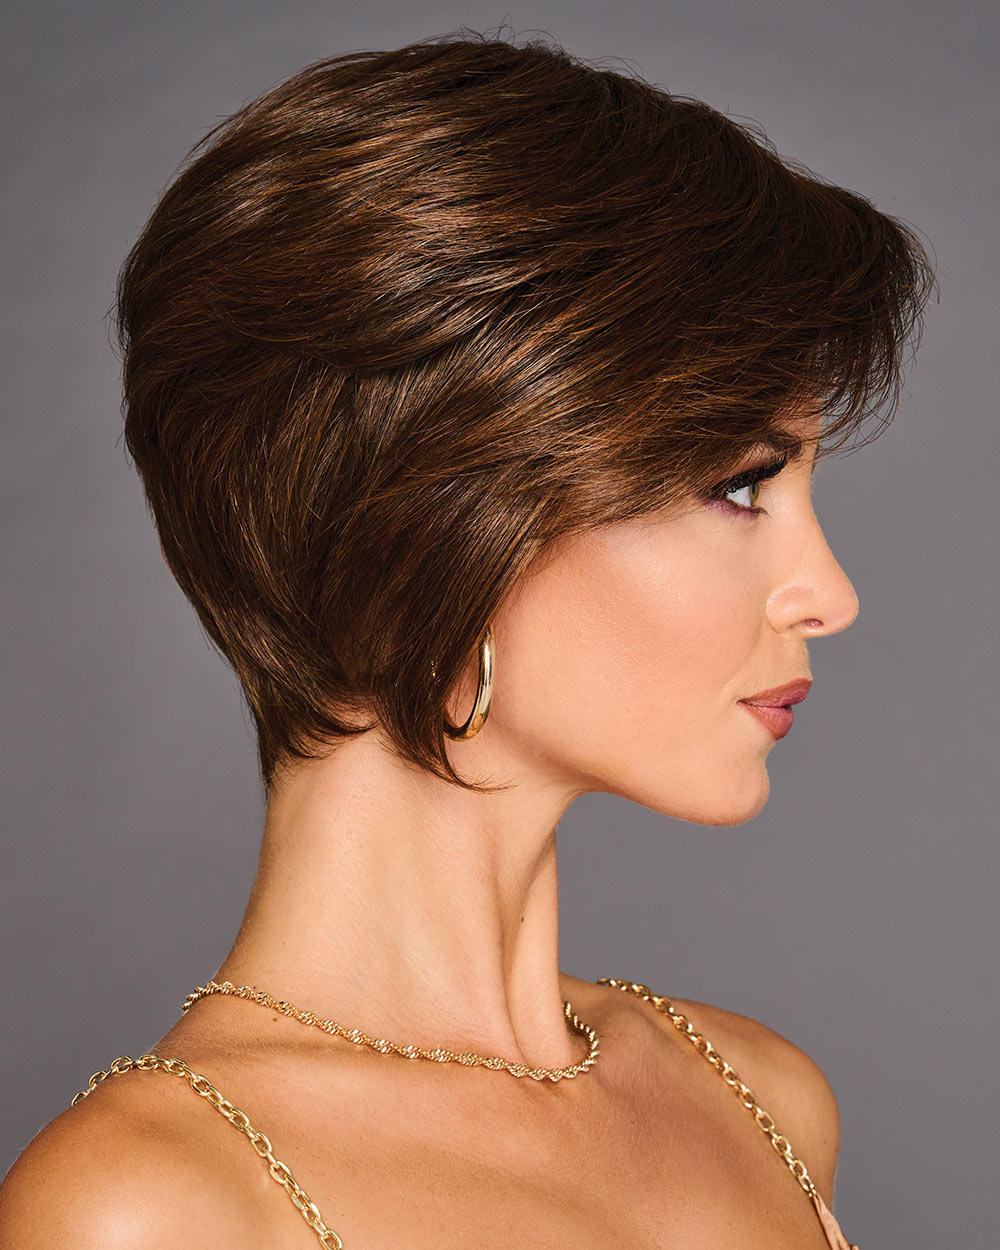 15 Best Short Wigs and Synthetic Hair Styles for 2020